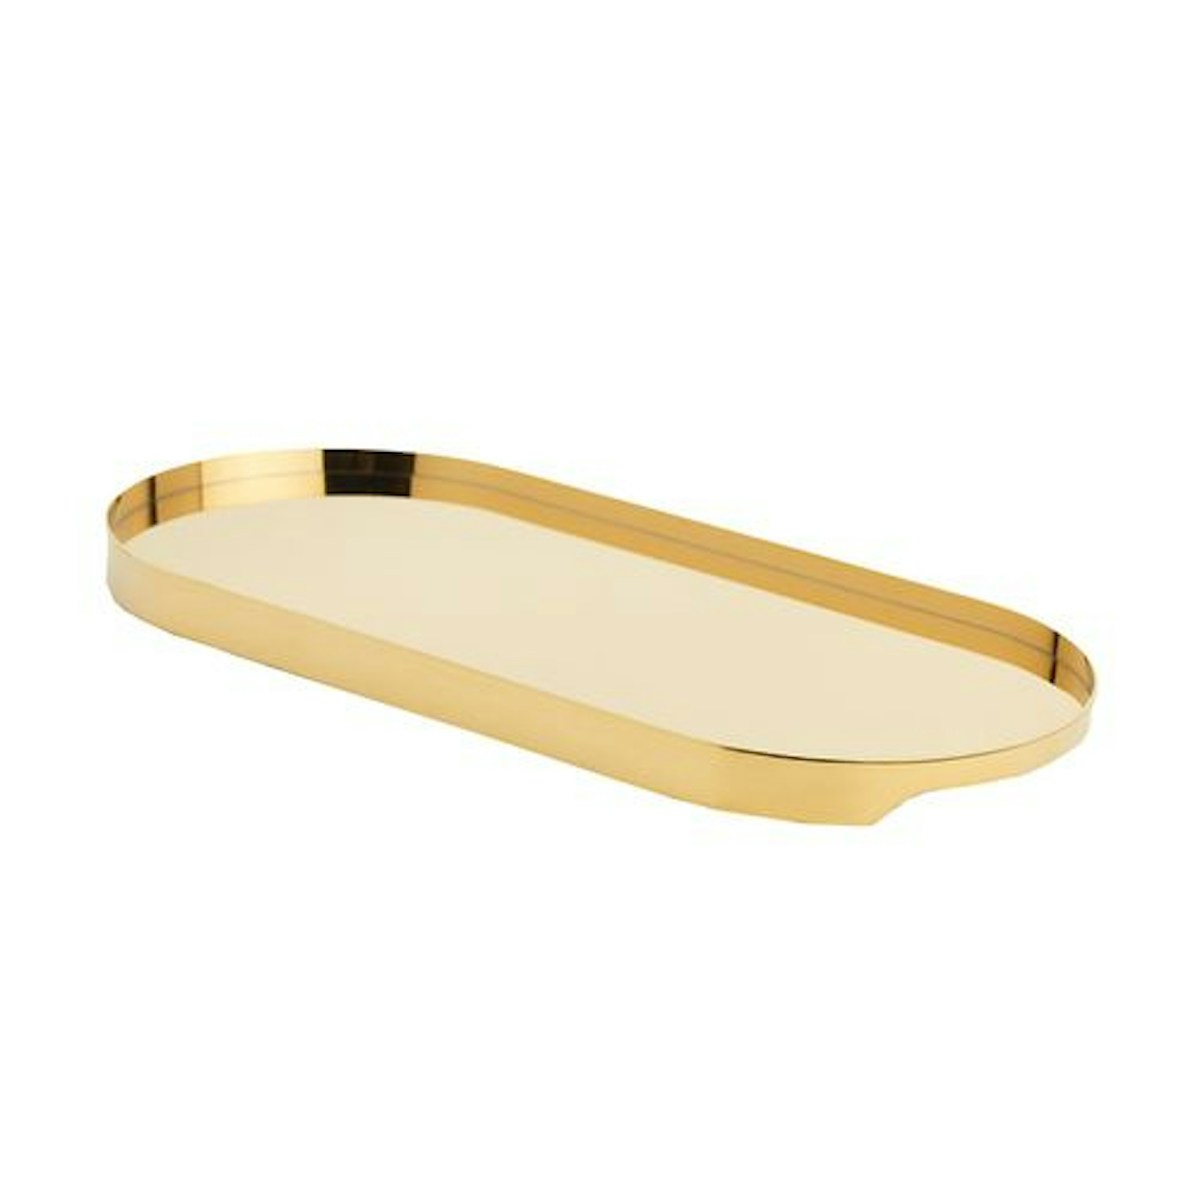 Galleria Steel Tray, Brass - 21 Best Decorative Trays To Buy For Your Tabletop - LuxDeco.com